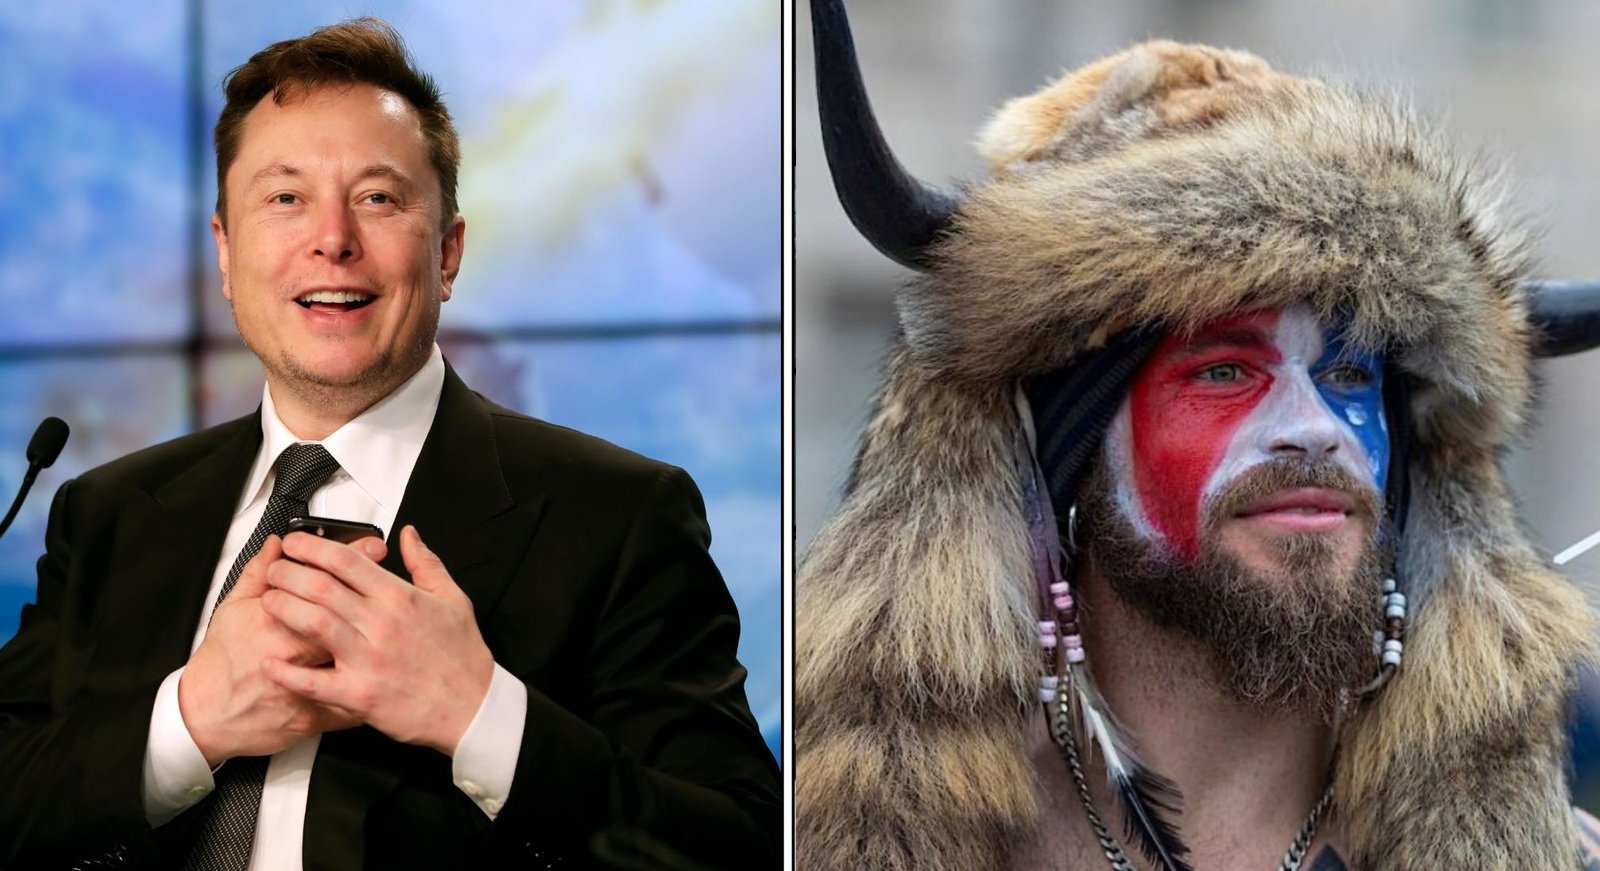 Elon Musk called for the release of 'QAnon Shaman' Jacob Chansley, jailed for his role in the Capitol riot